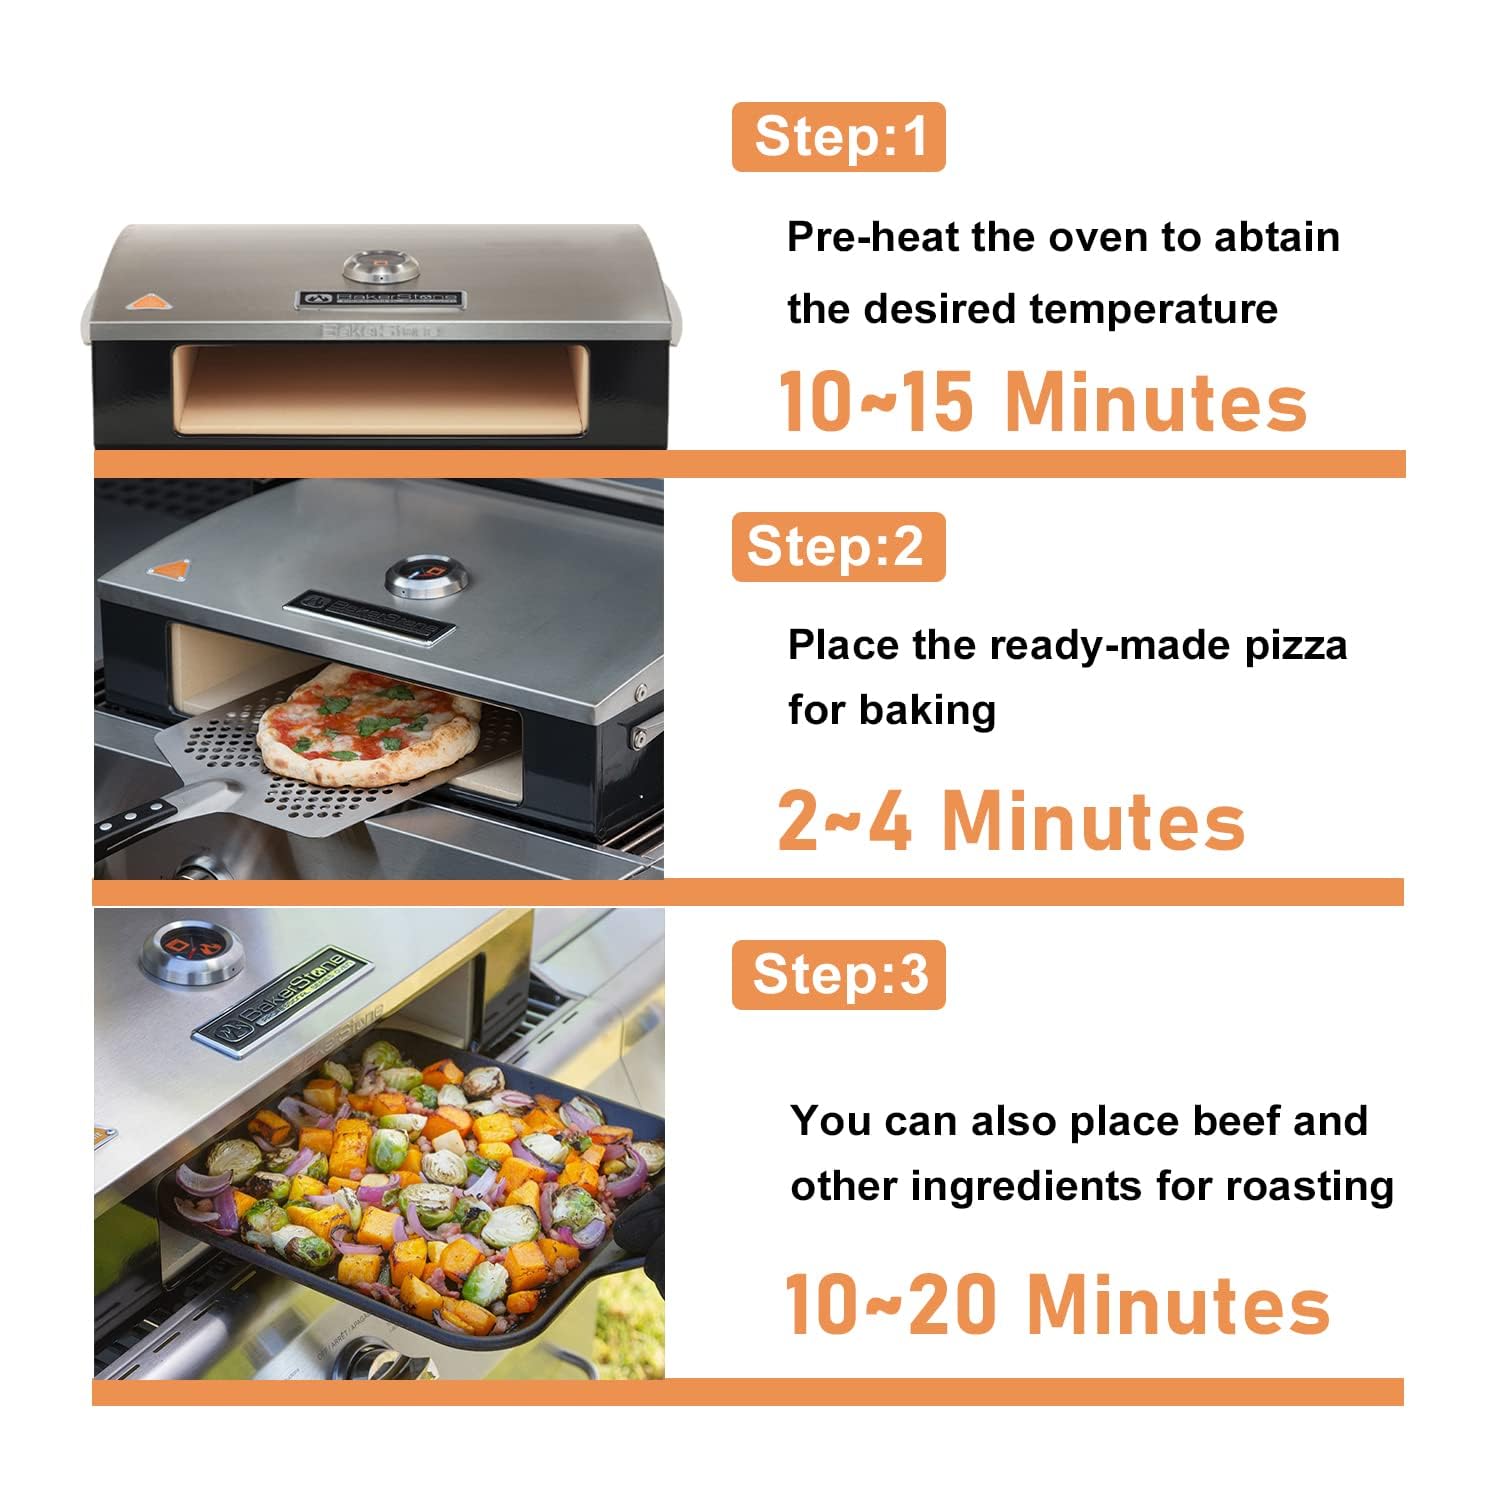 BakerStone P-AHXXX-O-000 Professional Series pizza oven, Black/Stainless